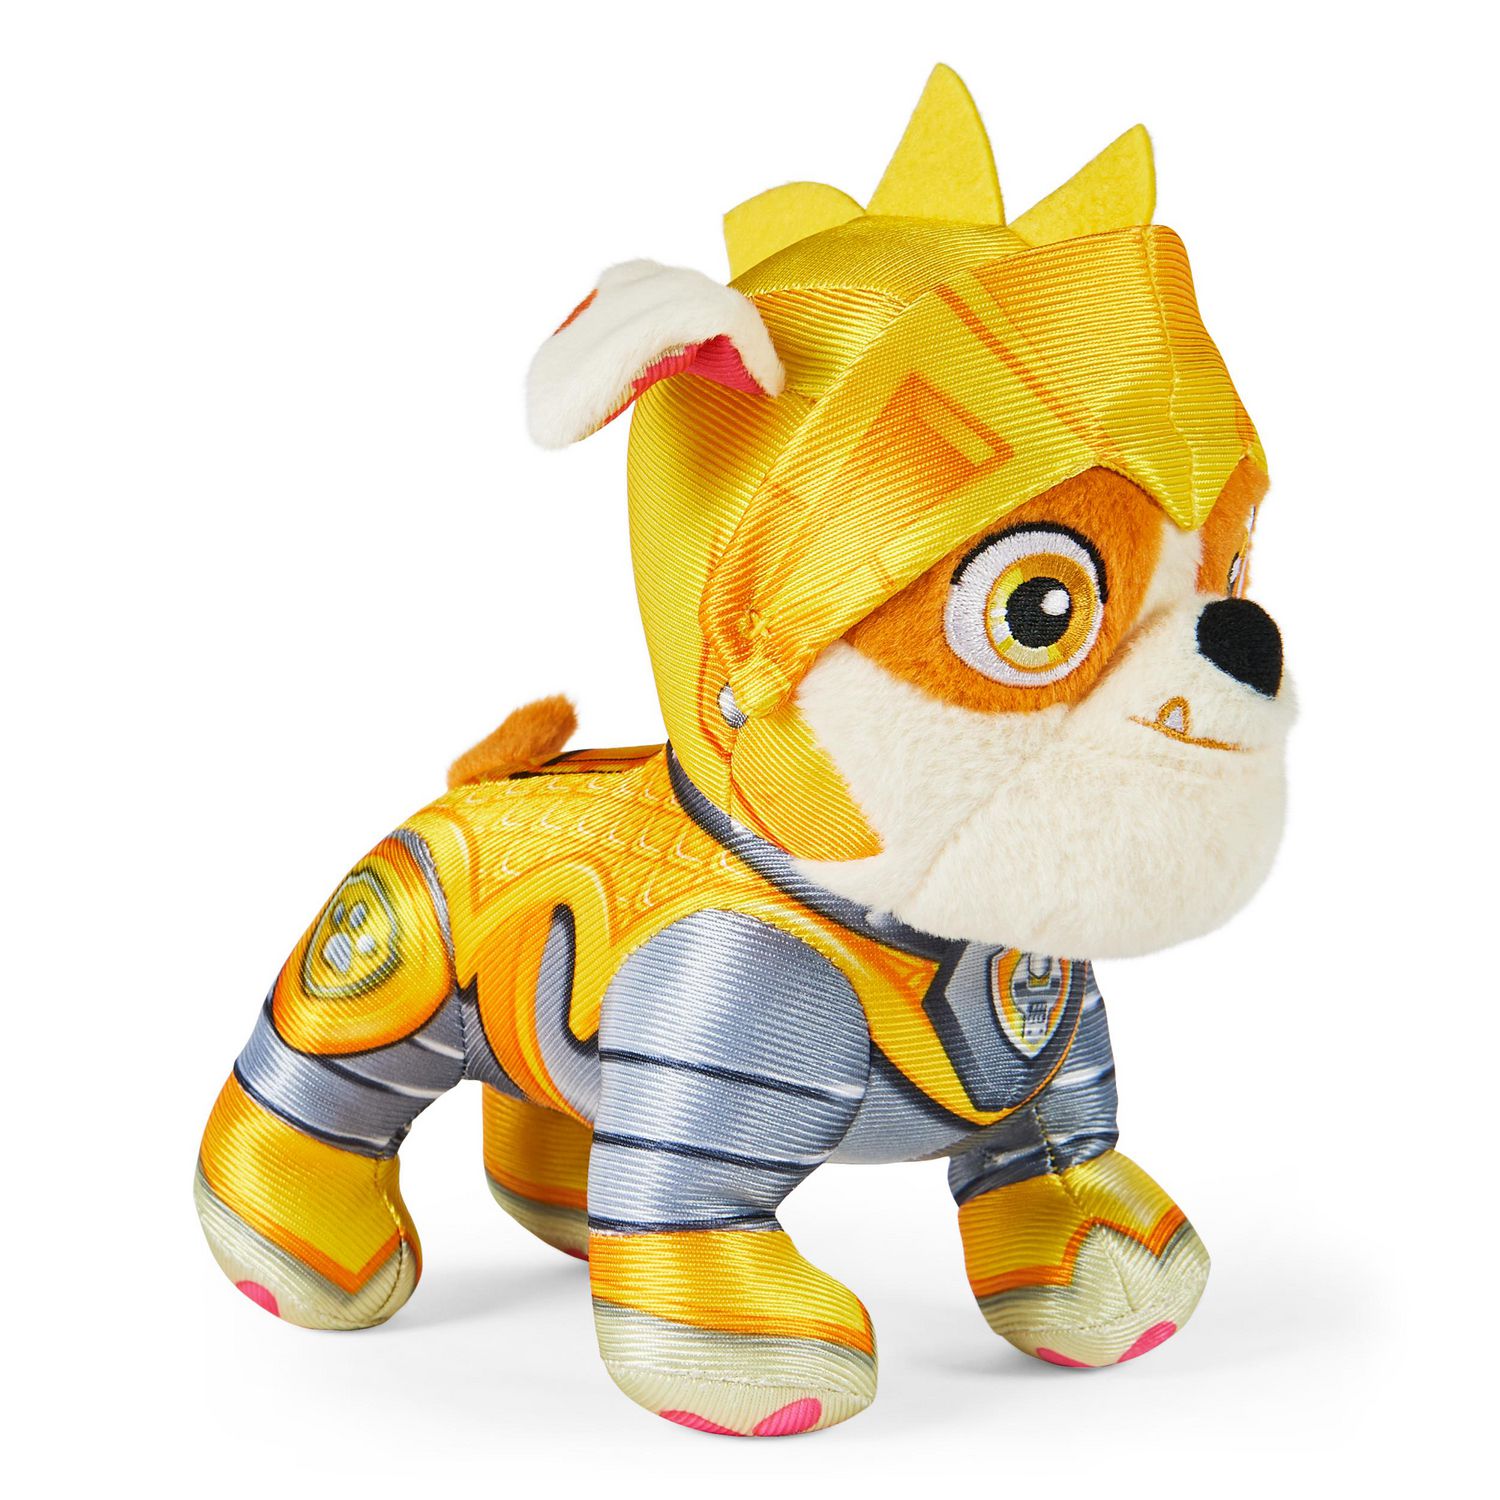 PAW Patrol, Rescue Knights Rubble Stuffed Animal Plush Toy, 8-inch, Kids  Toys for Ages 3 and up | Walmart Canada